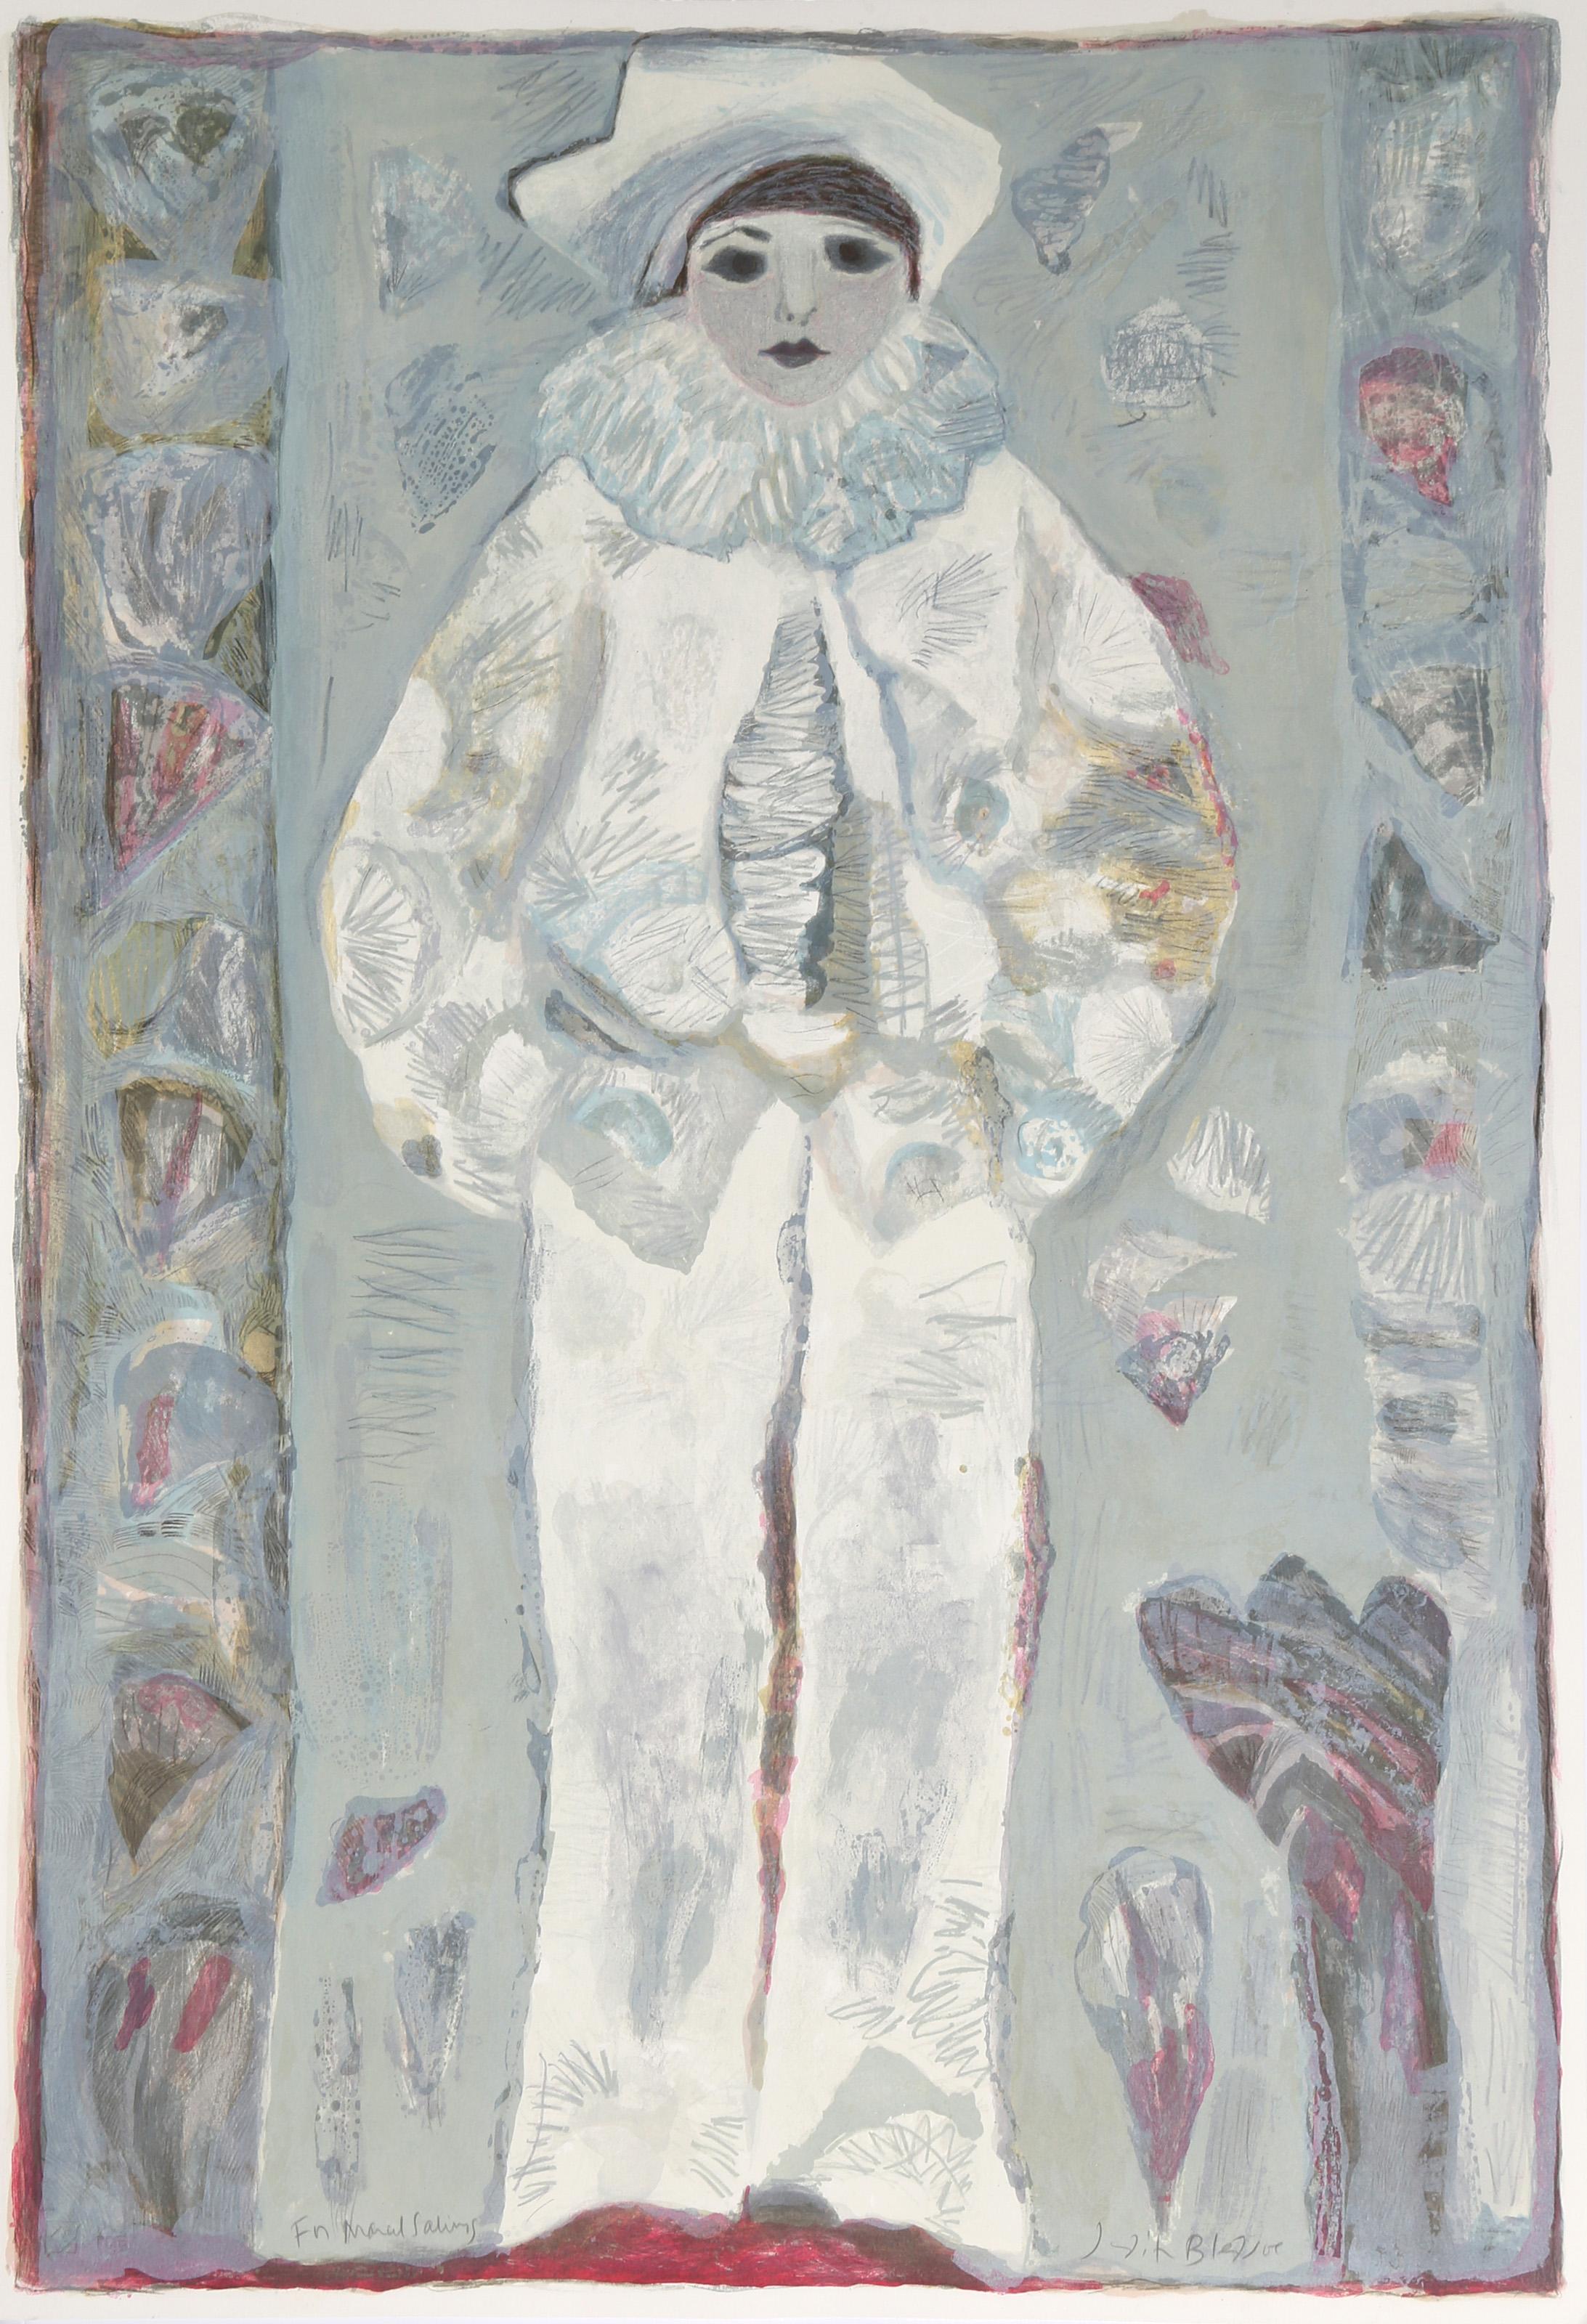 Judith Bledsoe, American (1938 - 2013) -  Clown I. Year: circa 1975, Medium: Lithograph, signed and dedicated in pencil, Size: 35 x 24 in. (88.9 x 60.96 cm), Description: Standing with his hands tucked into his pockets, the clown wearing a white